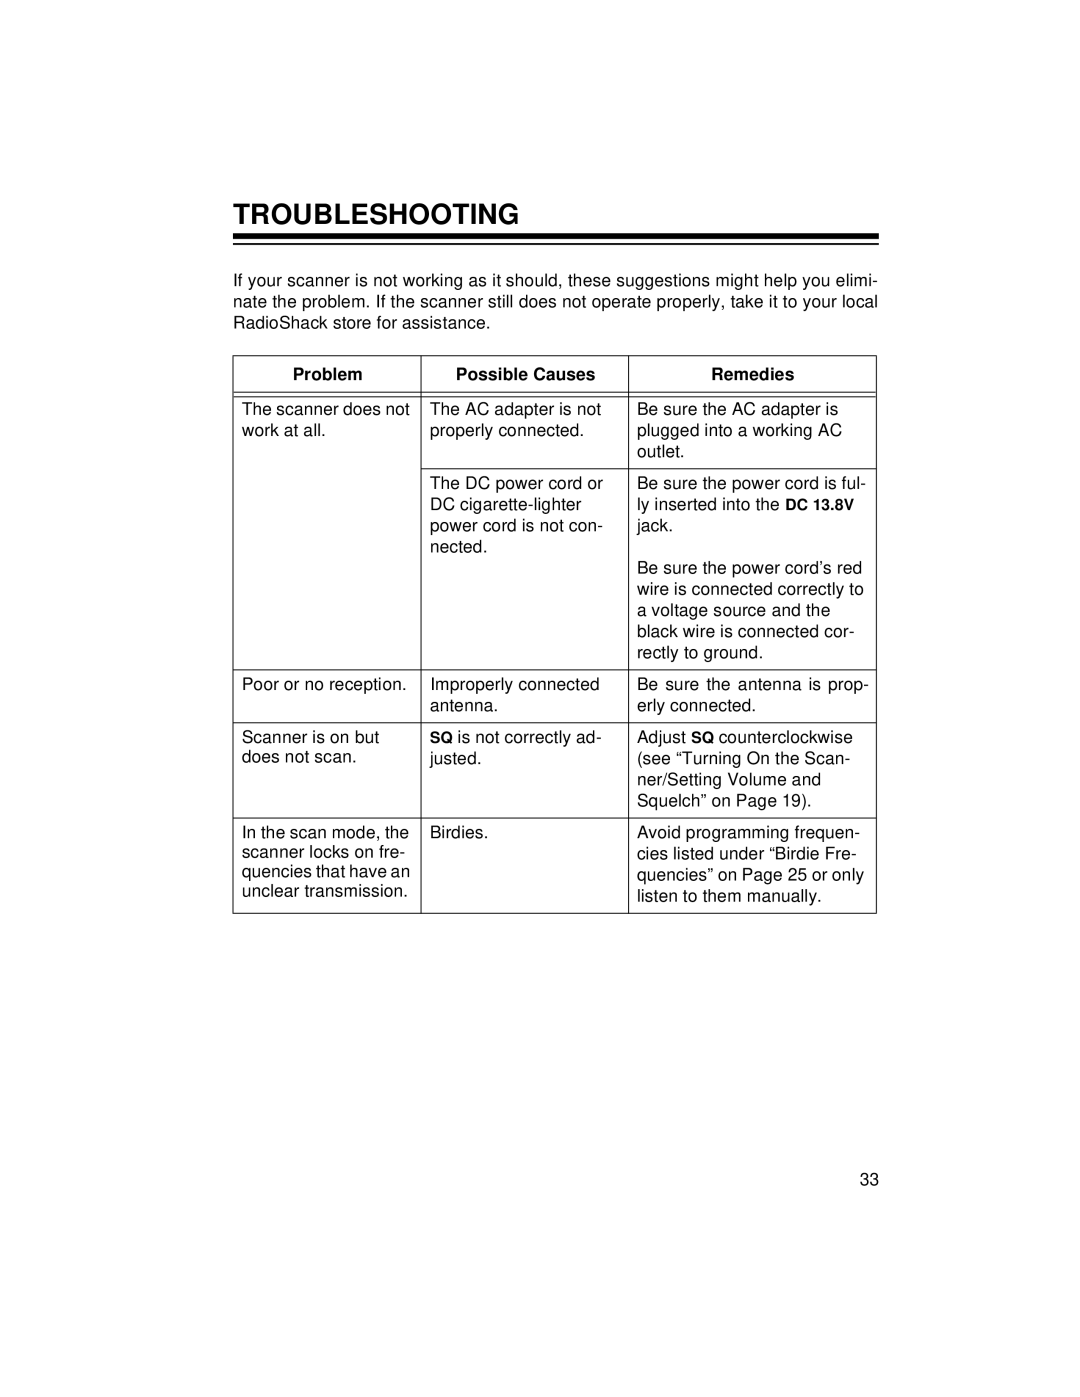 Radio Shack PRO-2056 owner manual Troubleshooting, Problem, Possible Causes, Remedies 